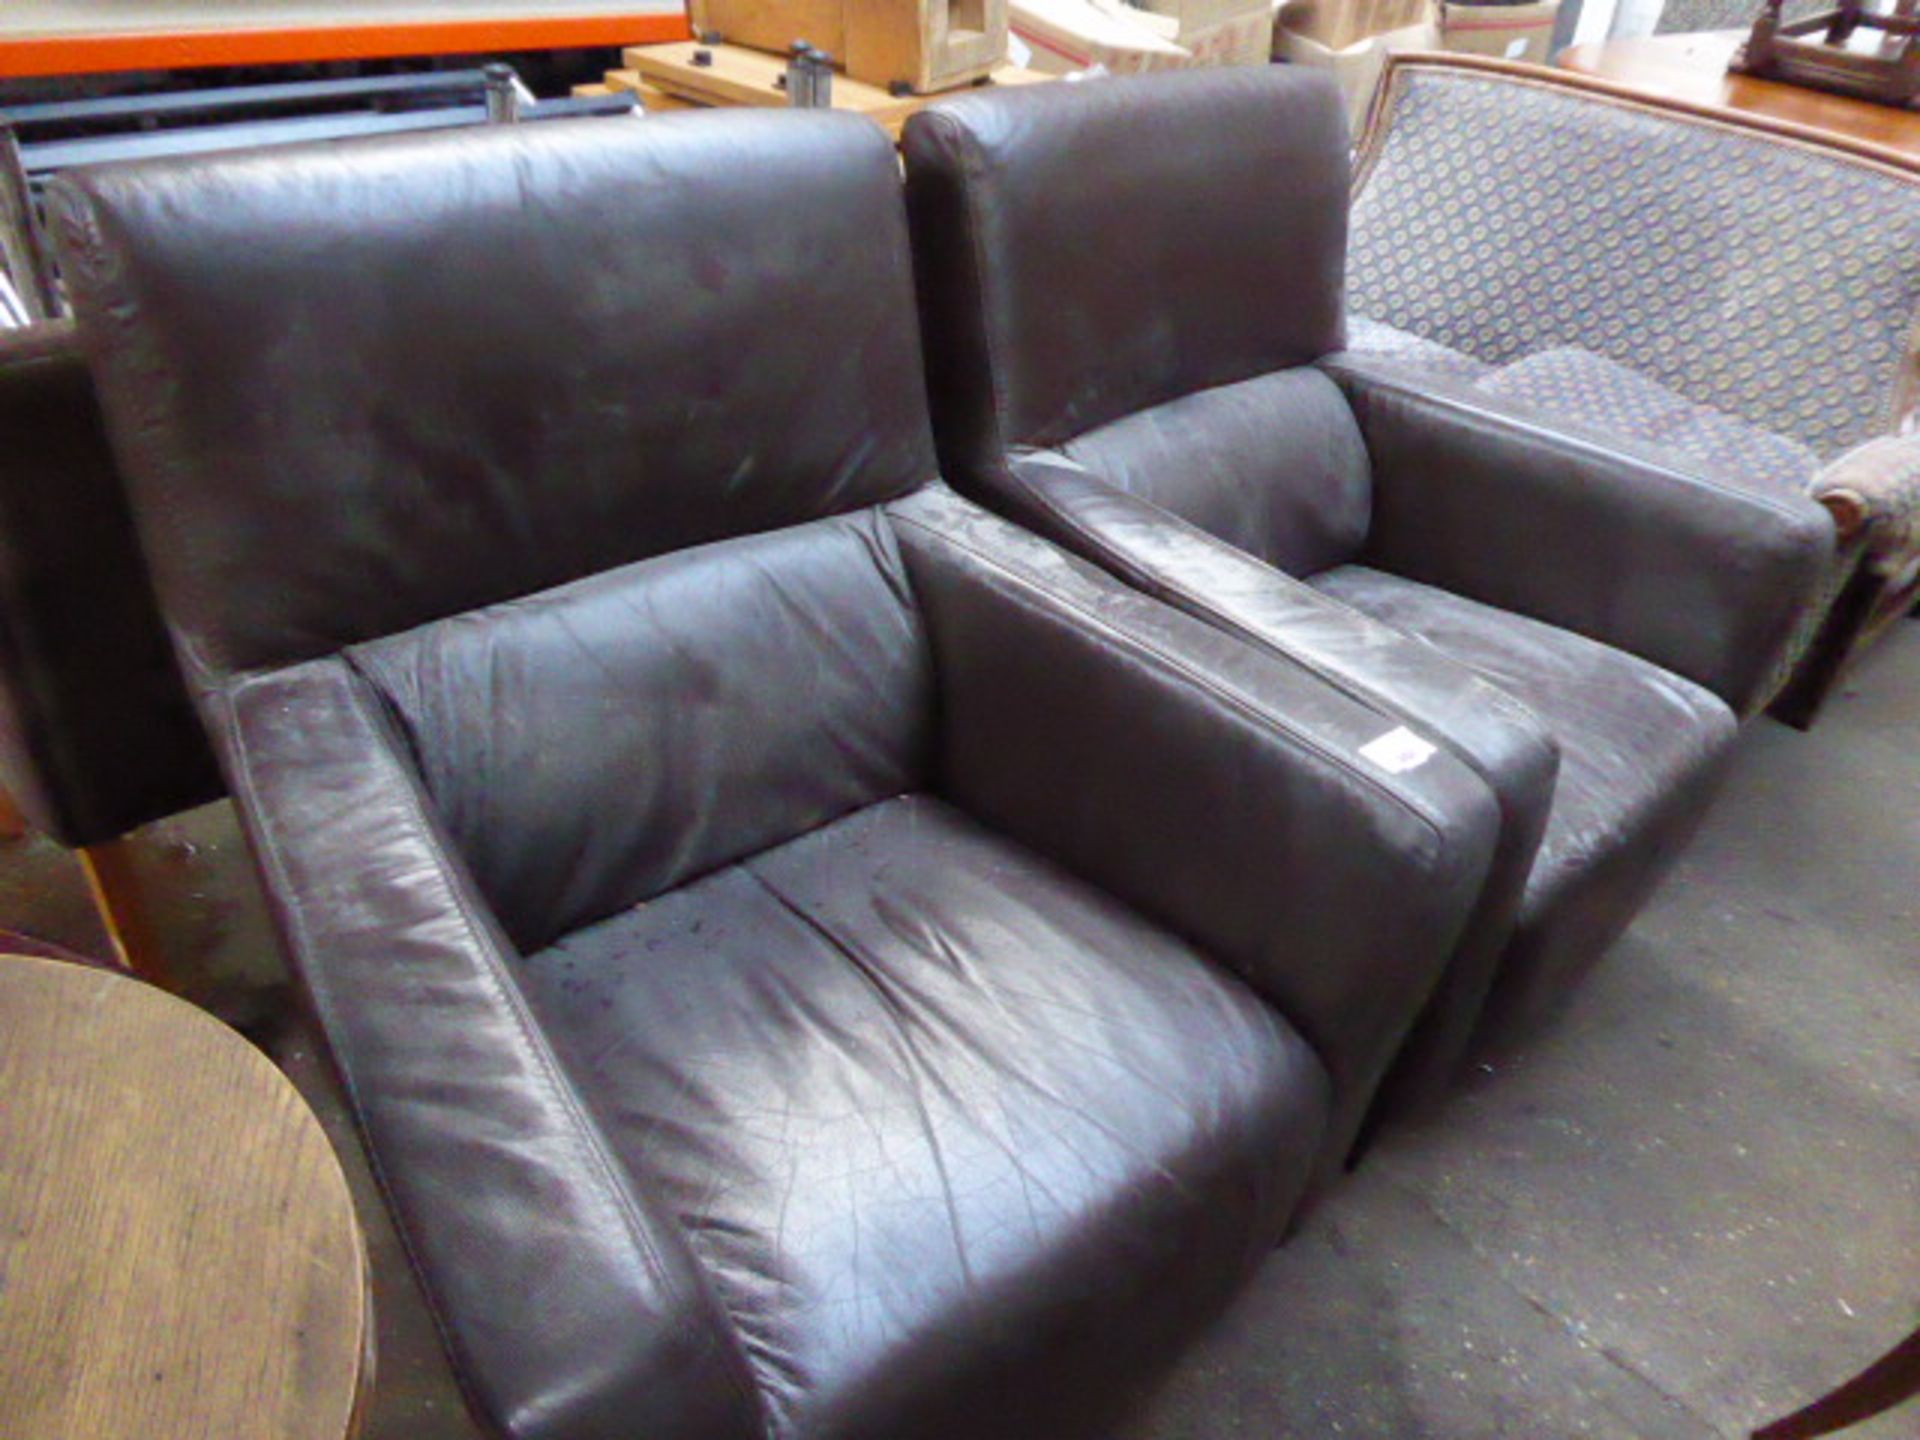 2 brown leather chairs with 1 stripy and 1 black cloth chair